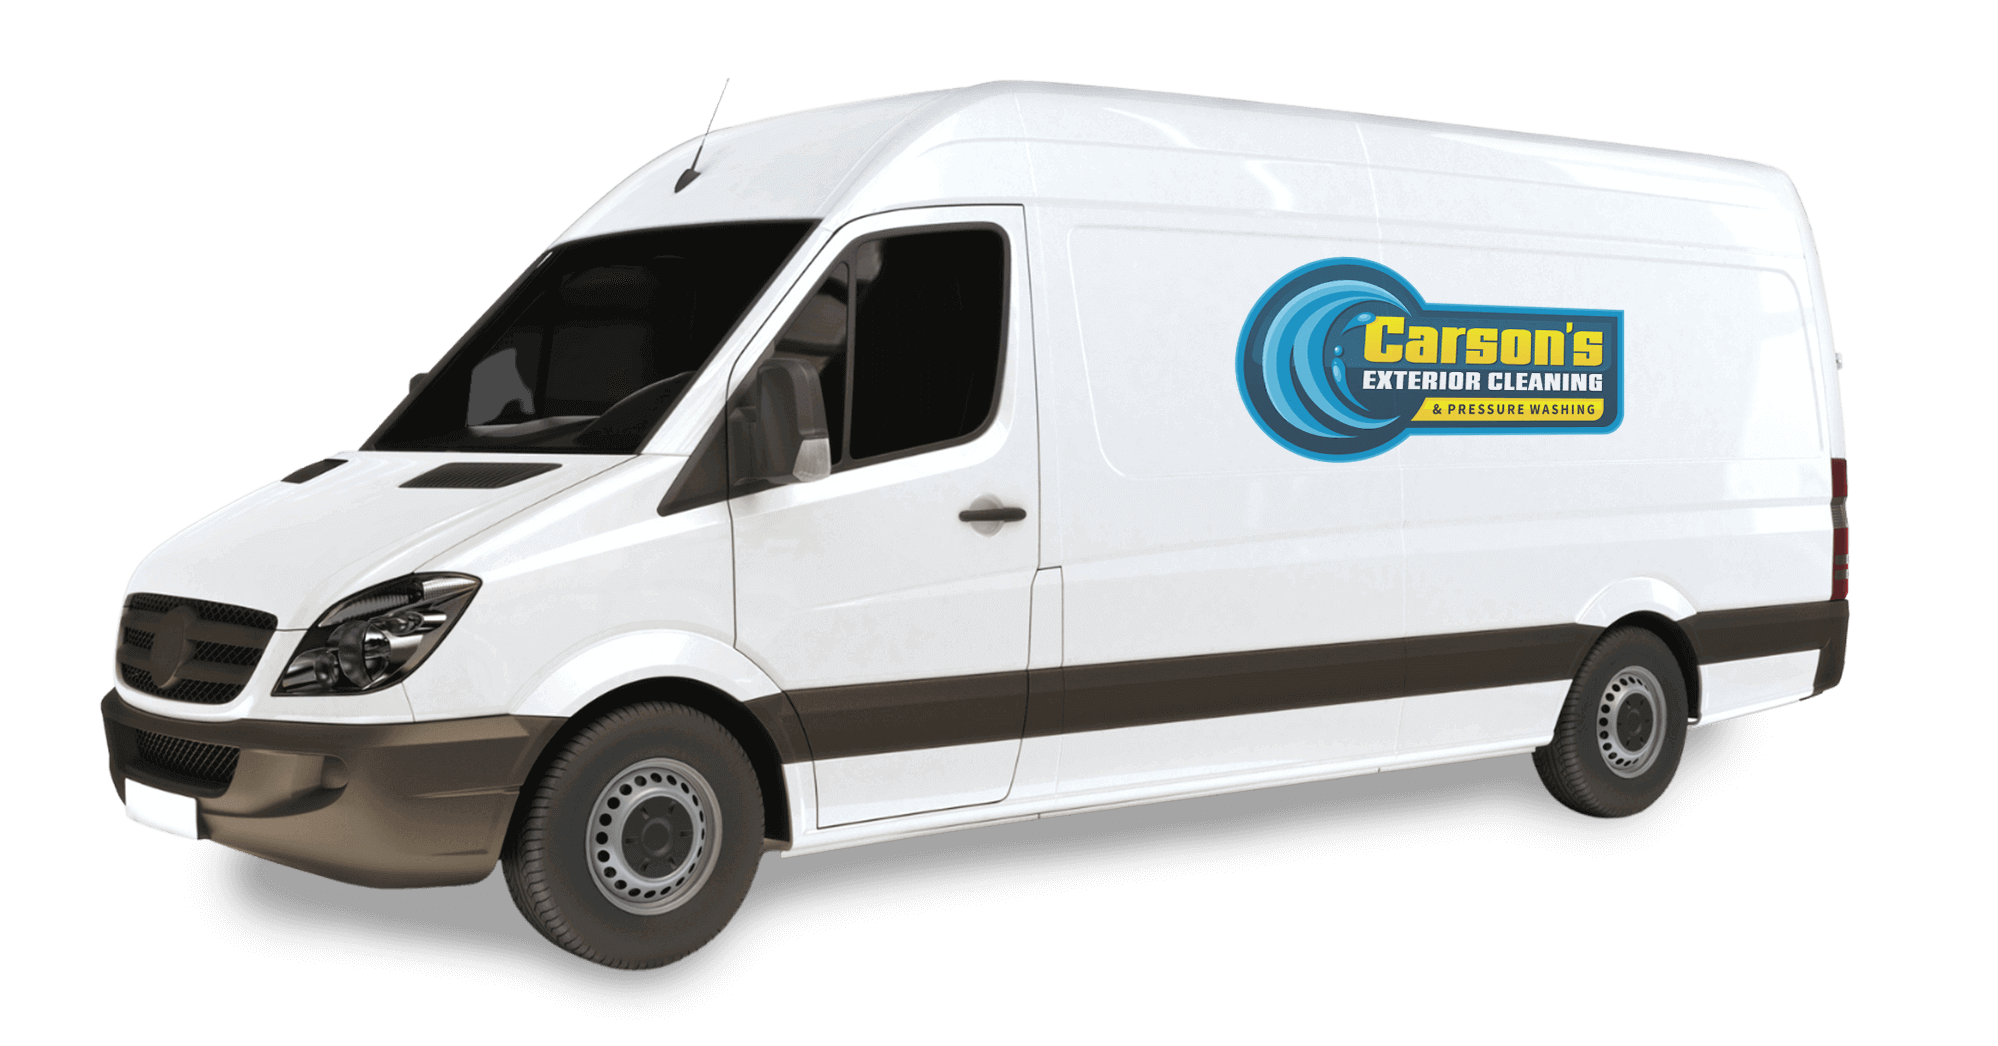 Carsons Exterior Cleaning Pressure Washing van